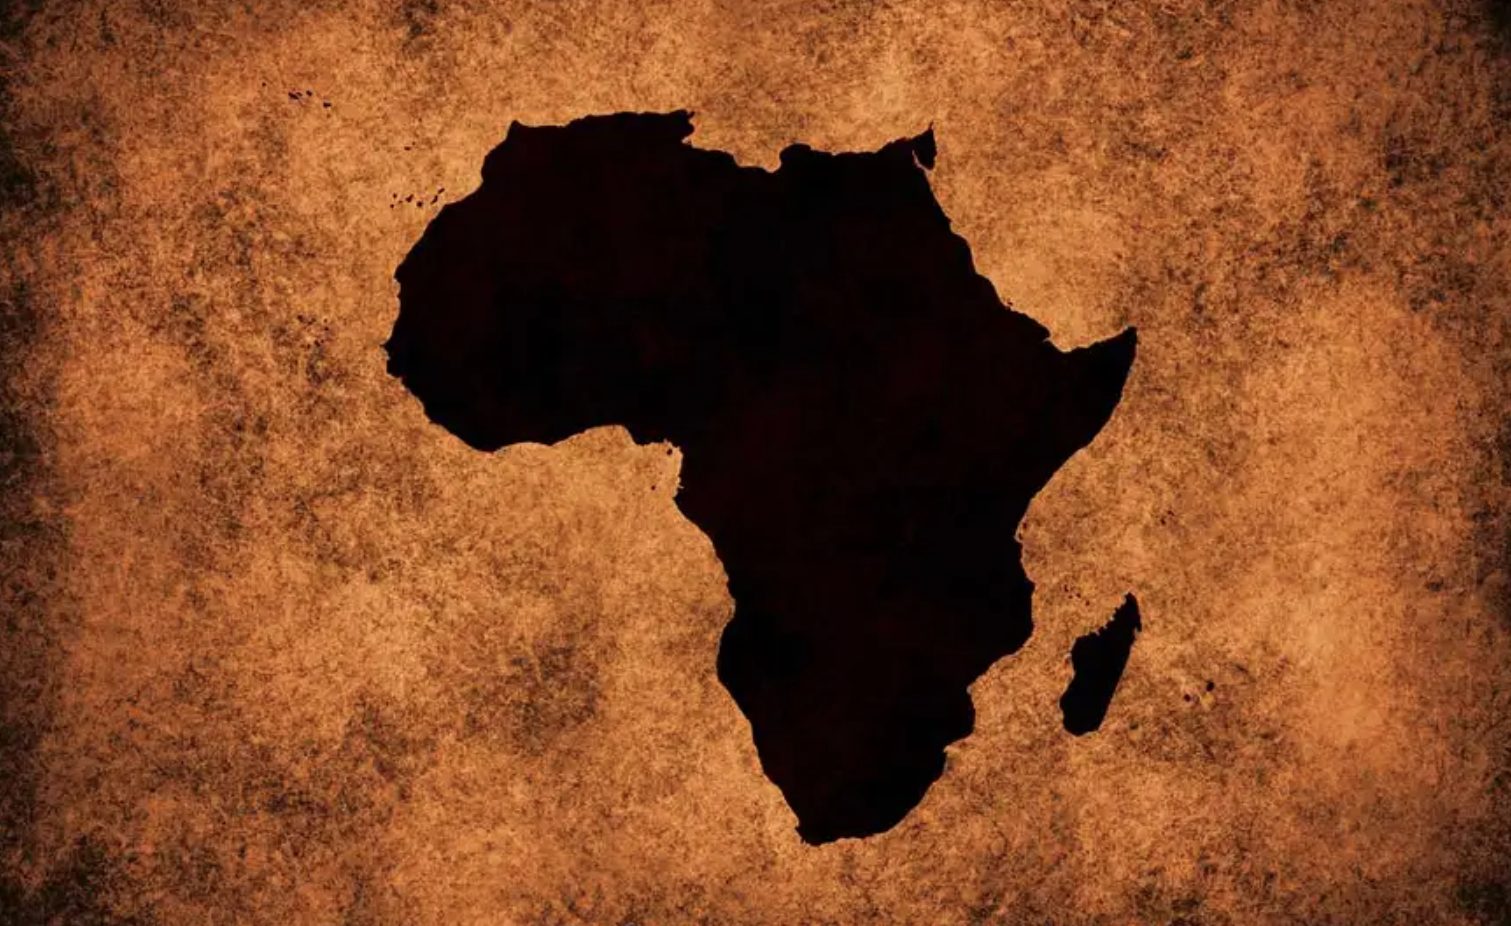 4RD EDITION SPECIALIZATION COURSE IN GEOPOLITICS OF SUB-SAHARAN AFRICA